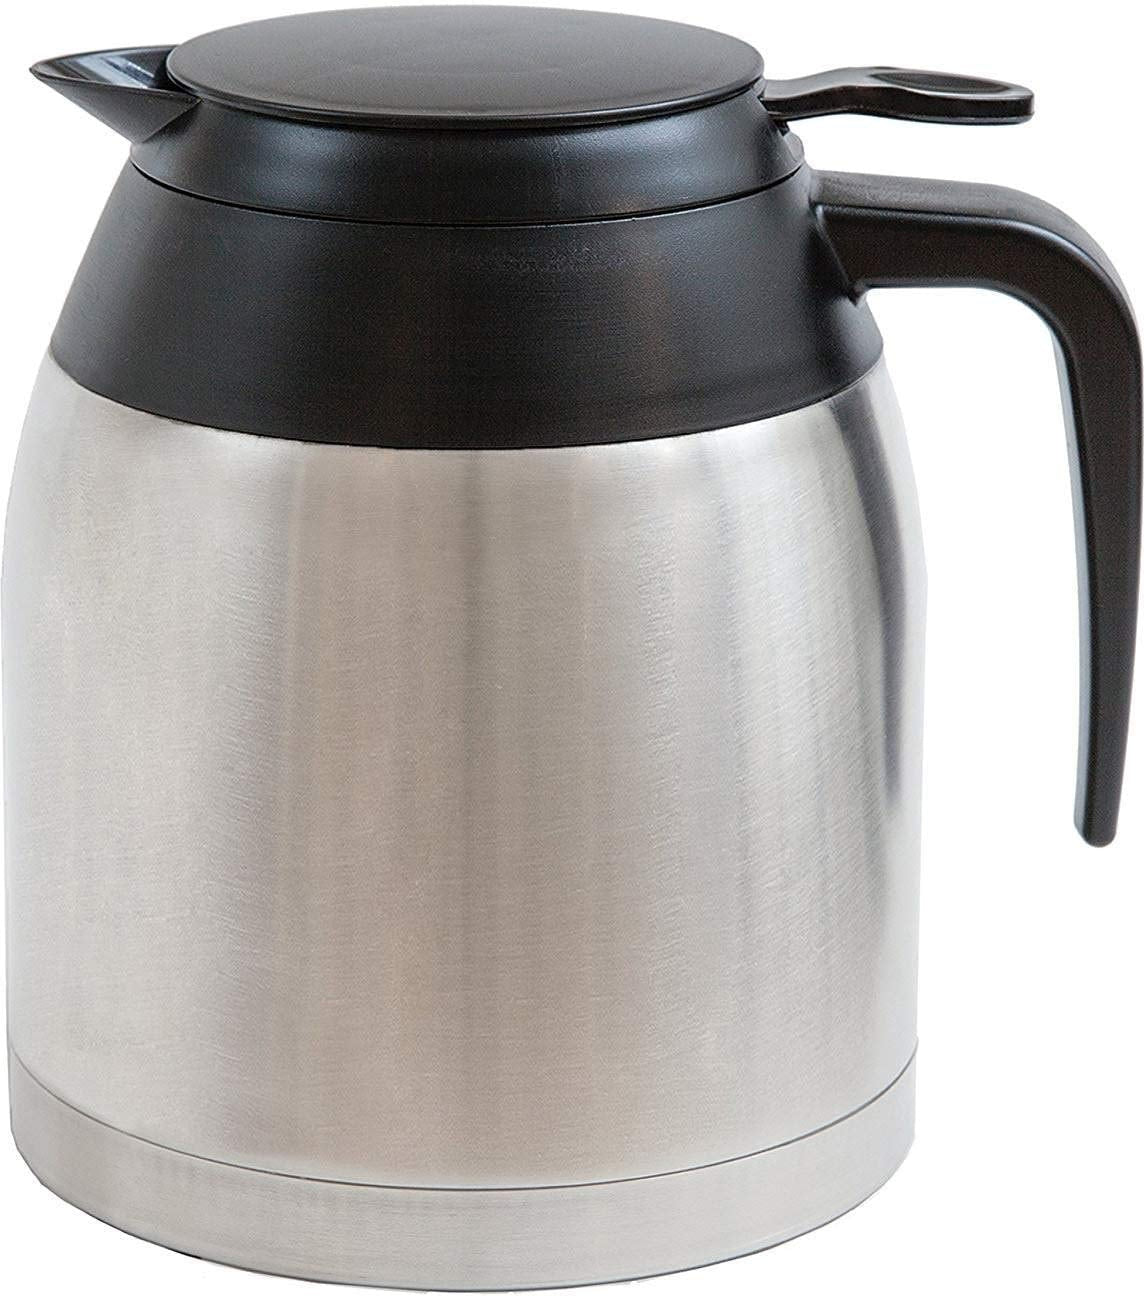 Thermal Carafe 1.25L - Driven Coffee